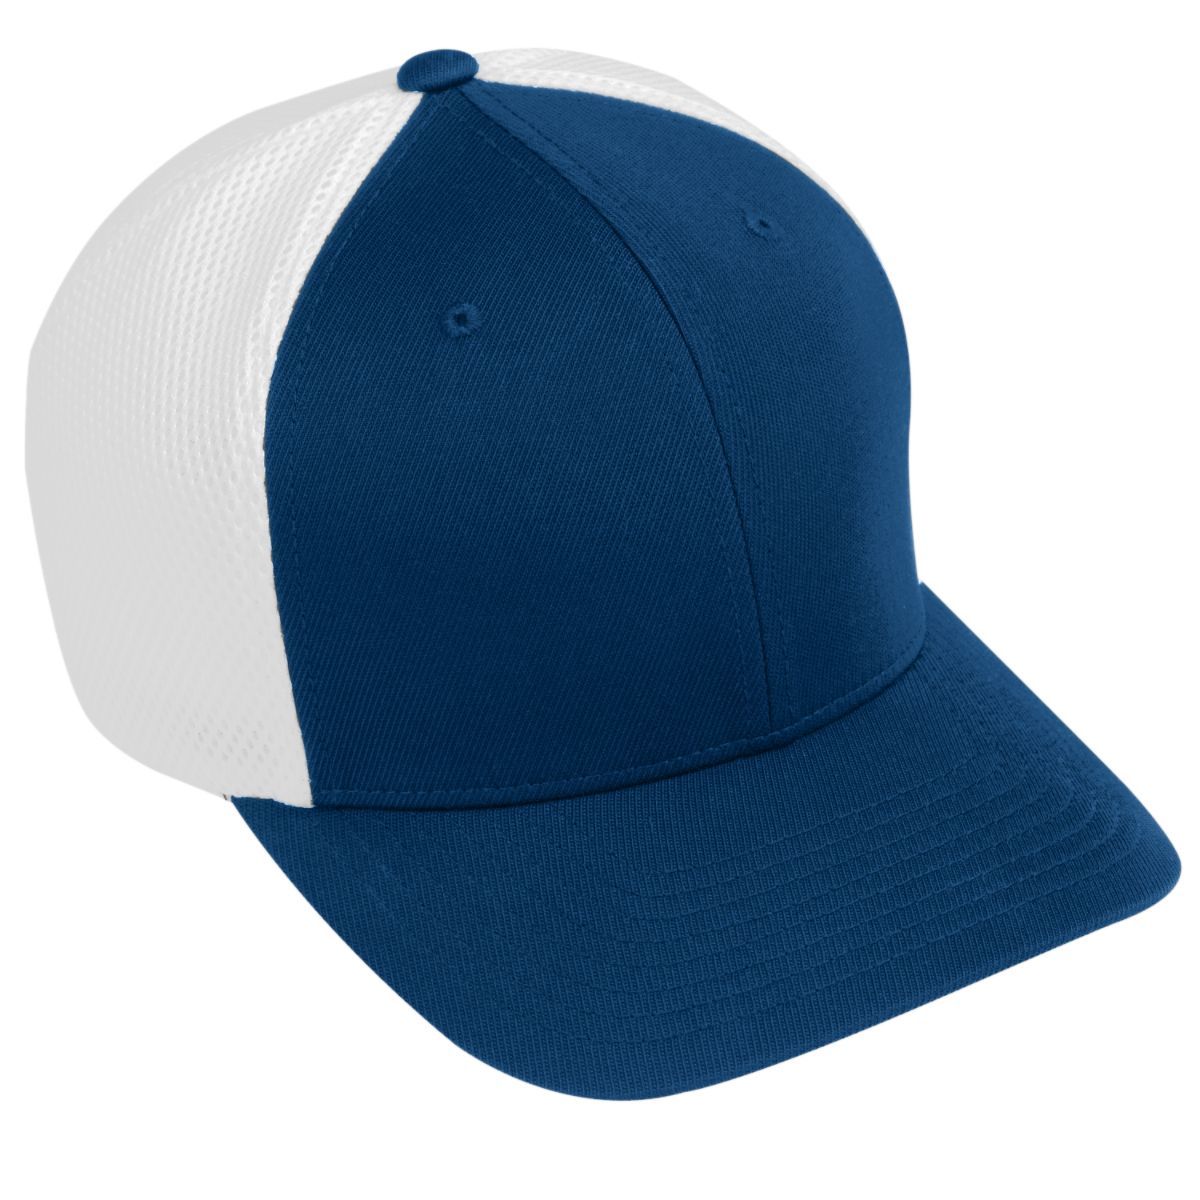 Augusta Sportswear Flexfit Vapor Cap in Navy/White  -Part of the Adult, Augusta-Products, Headwear, Headwear-Cap product lines at KanaleyCreations.com